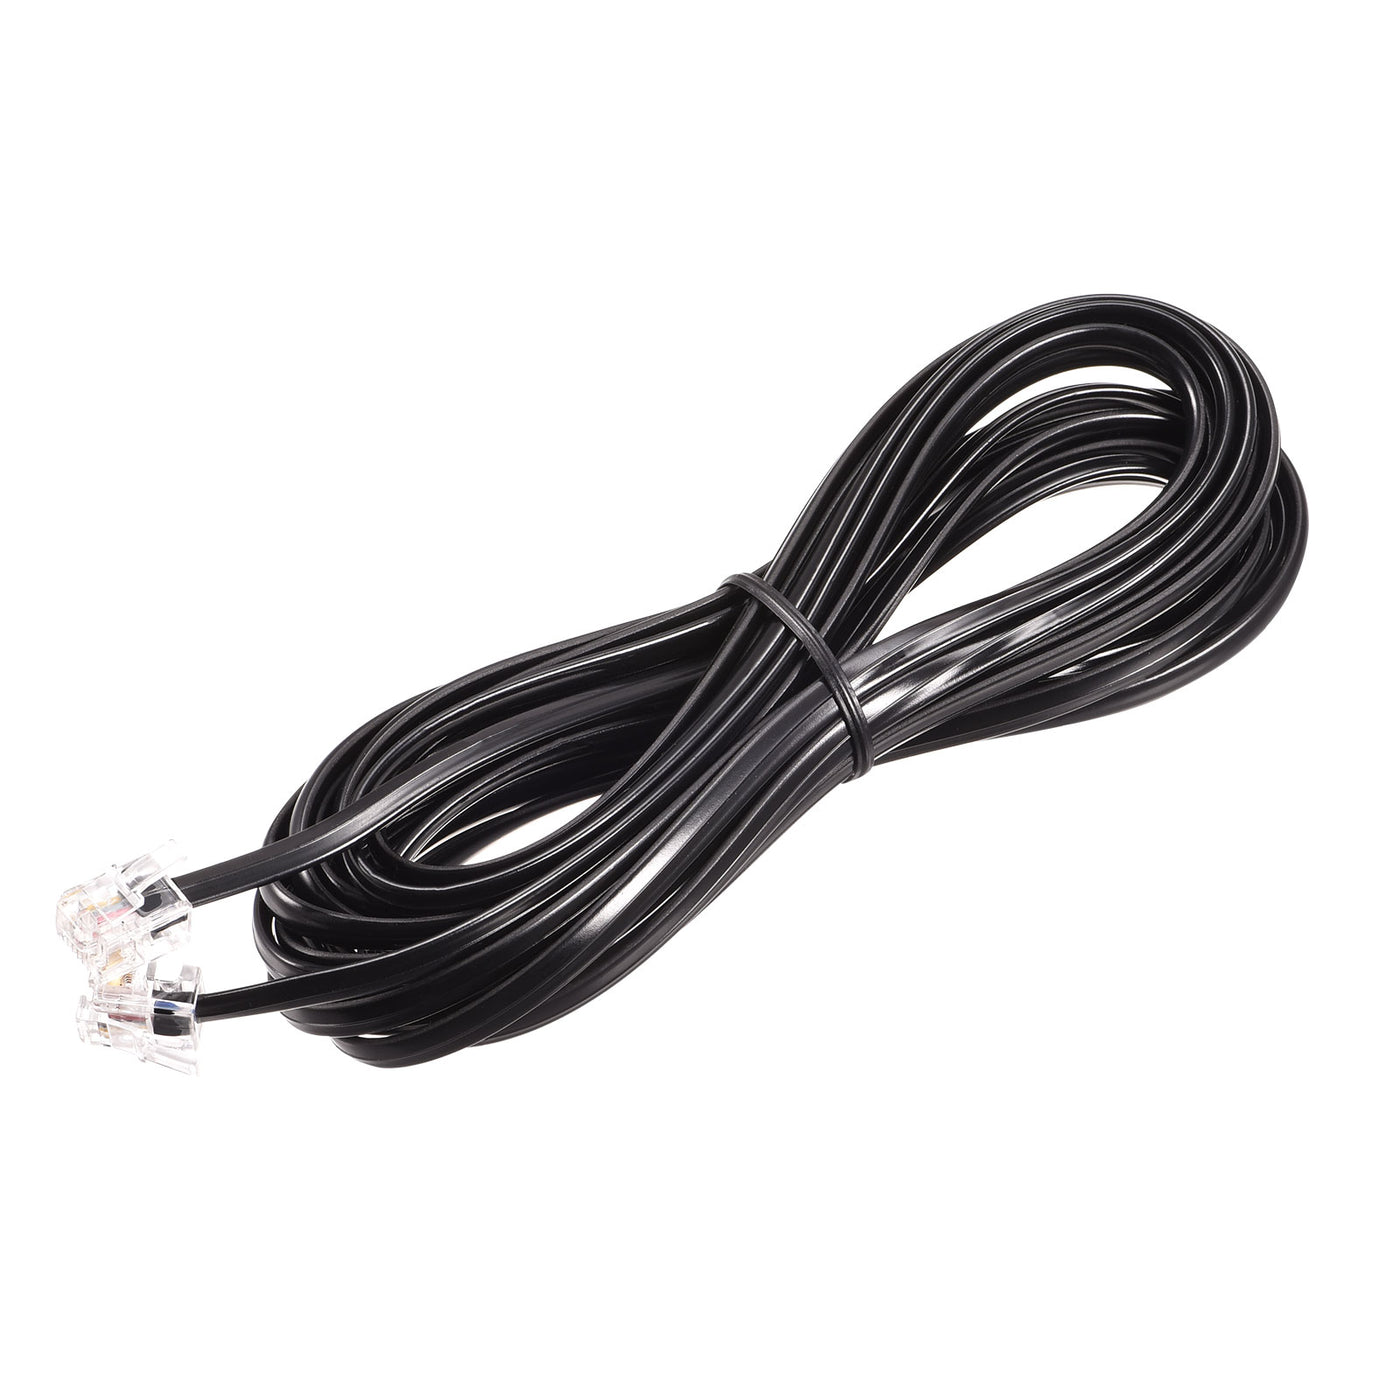 Harfington Phone Extension Cord Telephone Cable Phone Line Cord RJ11 6P4C Plugs, Male to Male for Phone and Fax